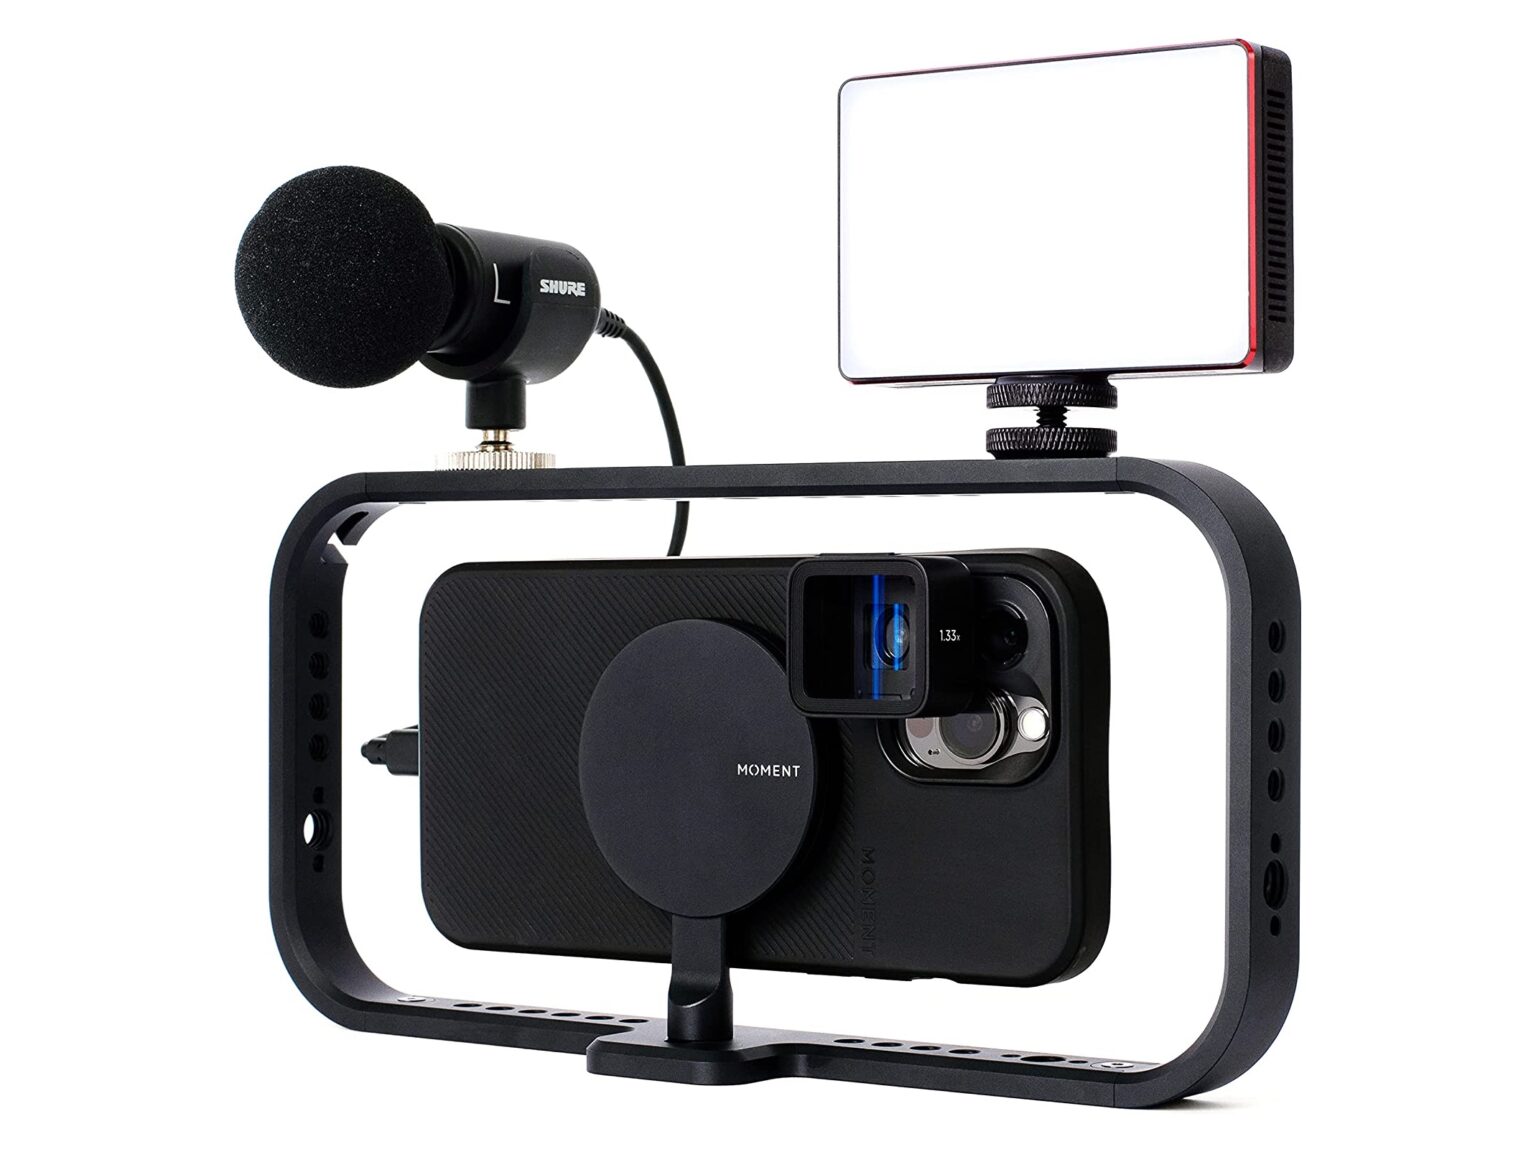 An iPhone with a Moment Case, Anamorphic Lens, and Filmmaker Cage with a microphone and LED light attached.